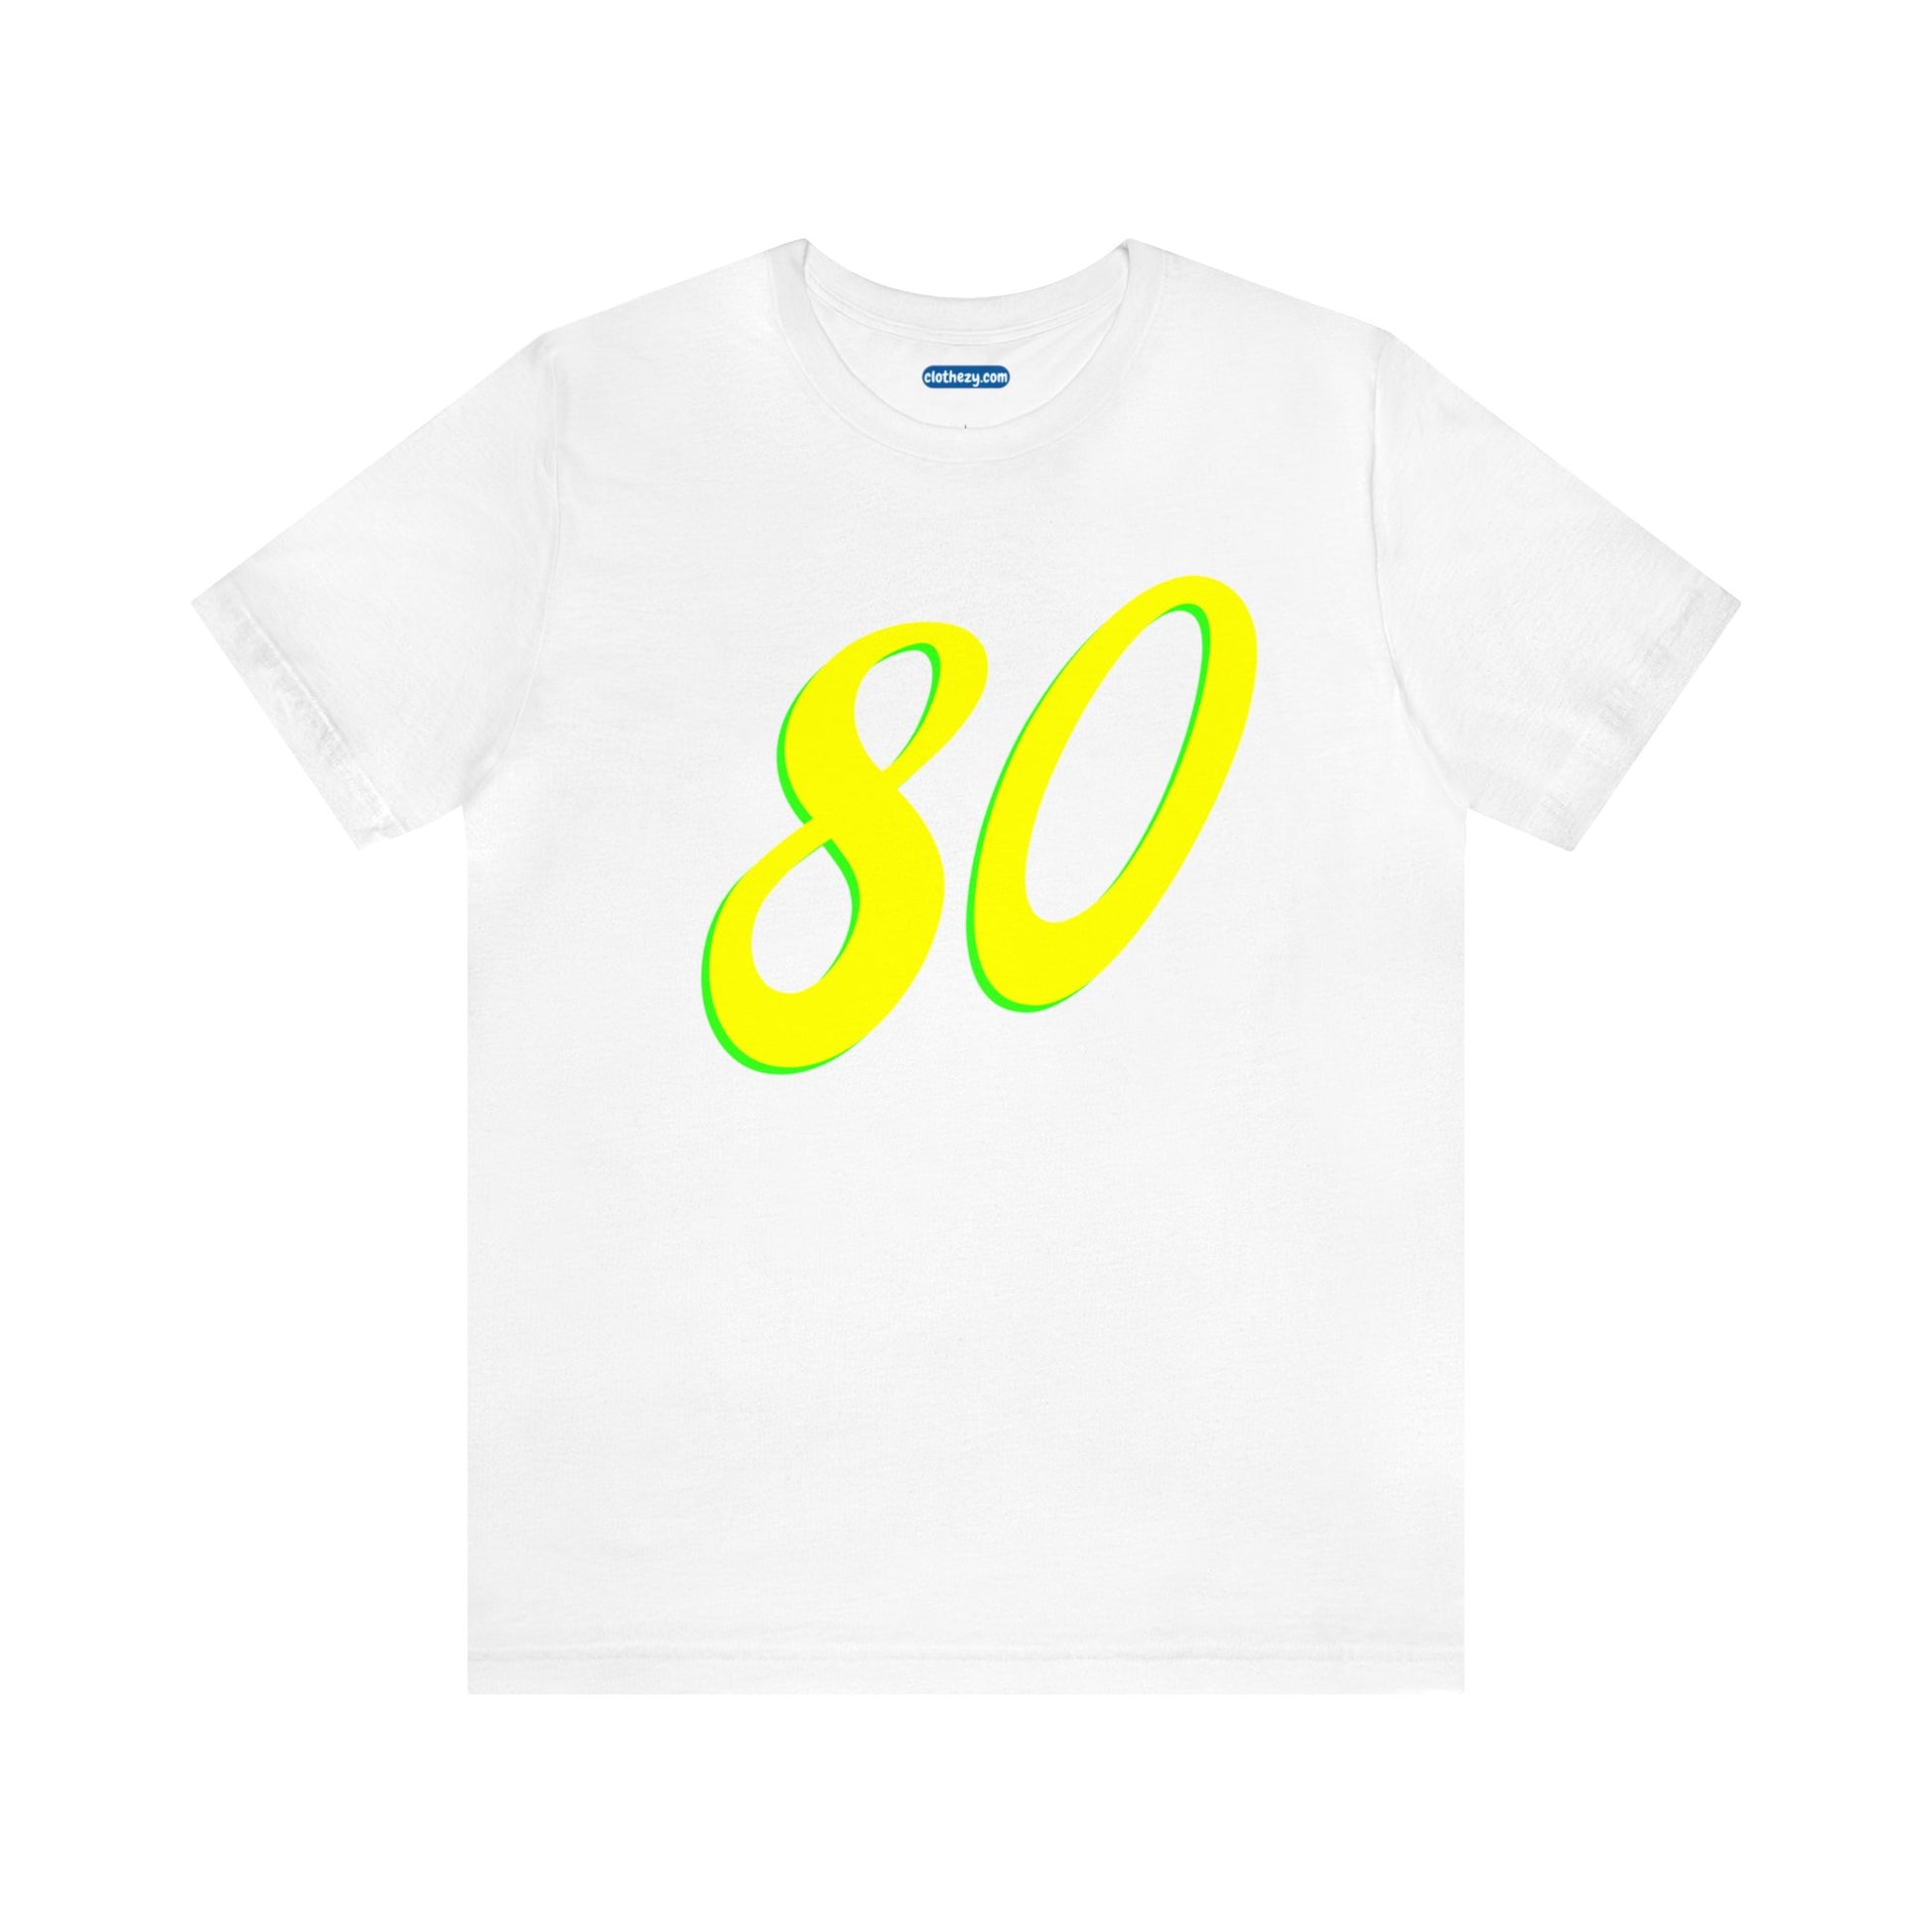 Number 80 Design - Soft Cotton Tee for birthdays and celebrations, Gift for friends and family, Multiple Options by clothezy.com in Olive Heather Size Small - Buy Now